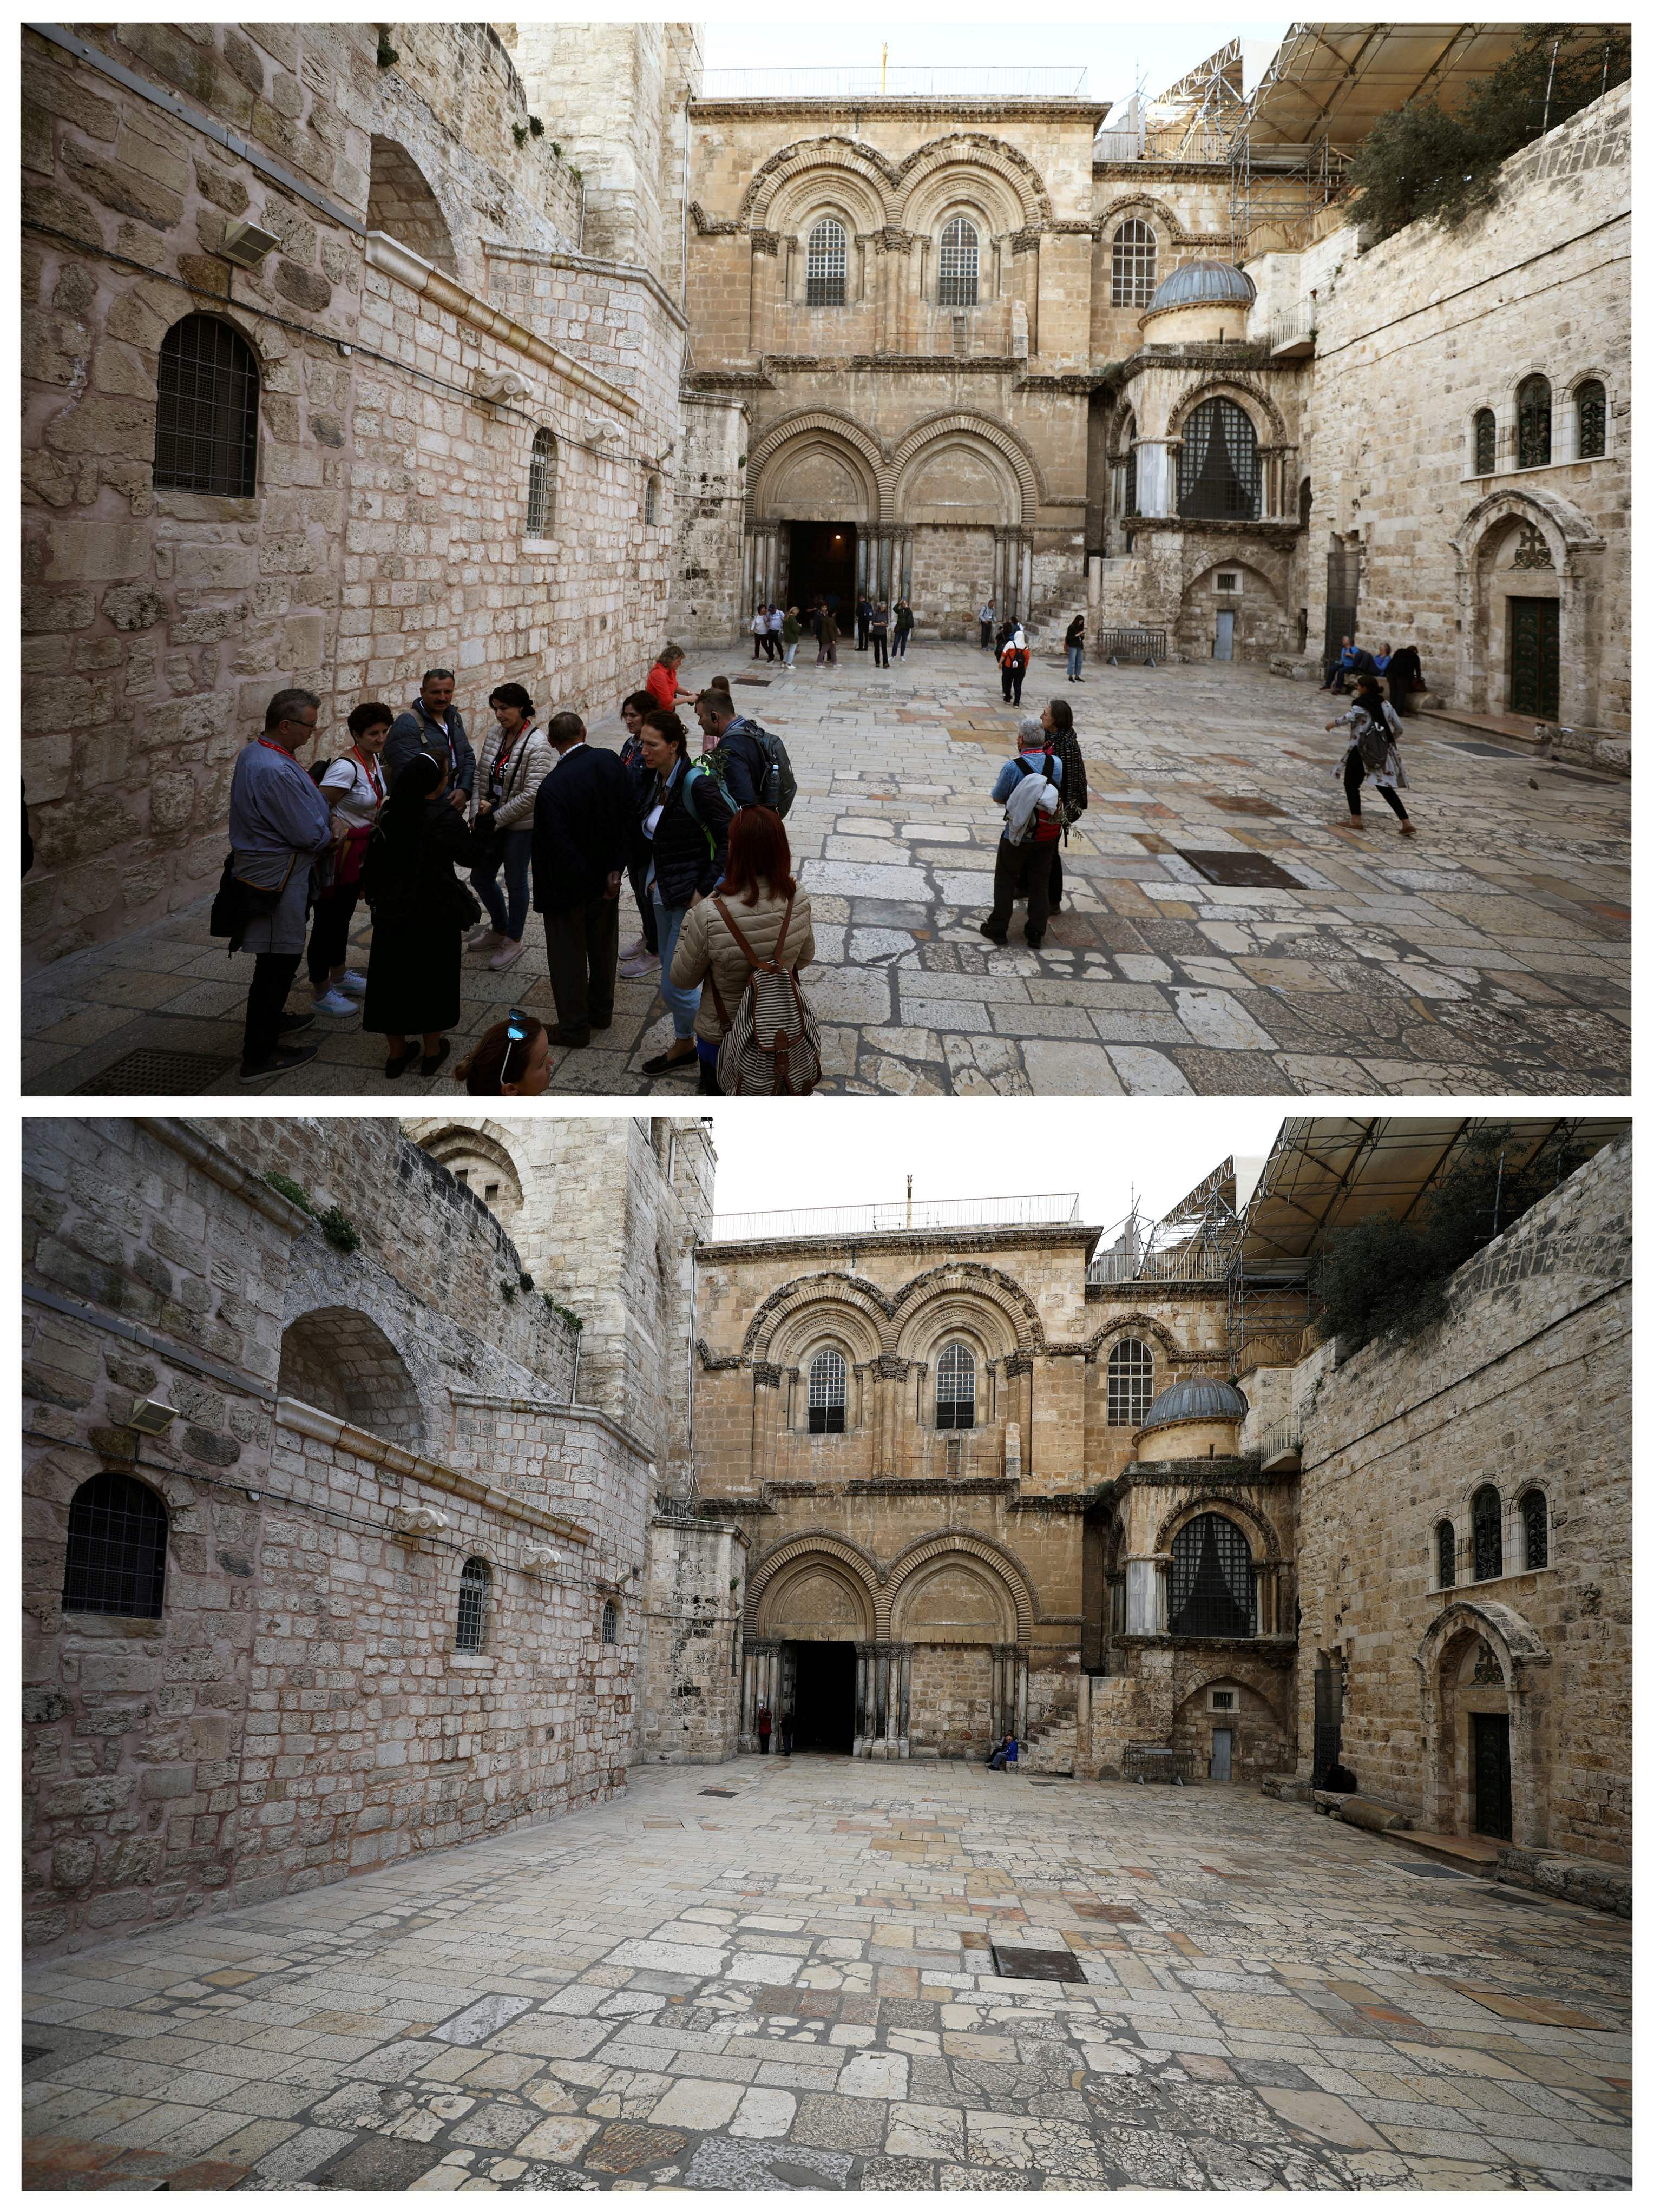 A combination picture shows visitors gathering in an area near the entrance of the Church of the Holy Sepulchre in Jerusalem's Old City. (Credit: Reuters)